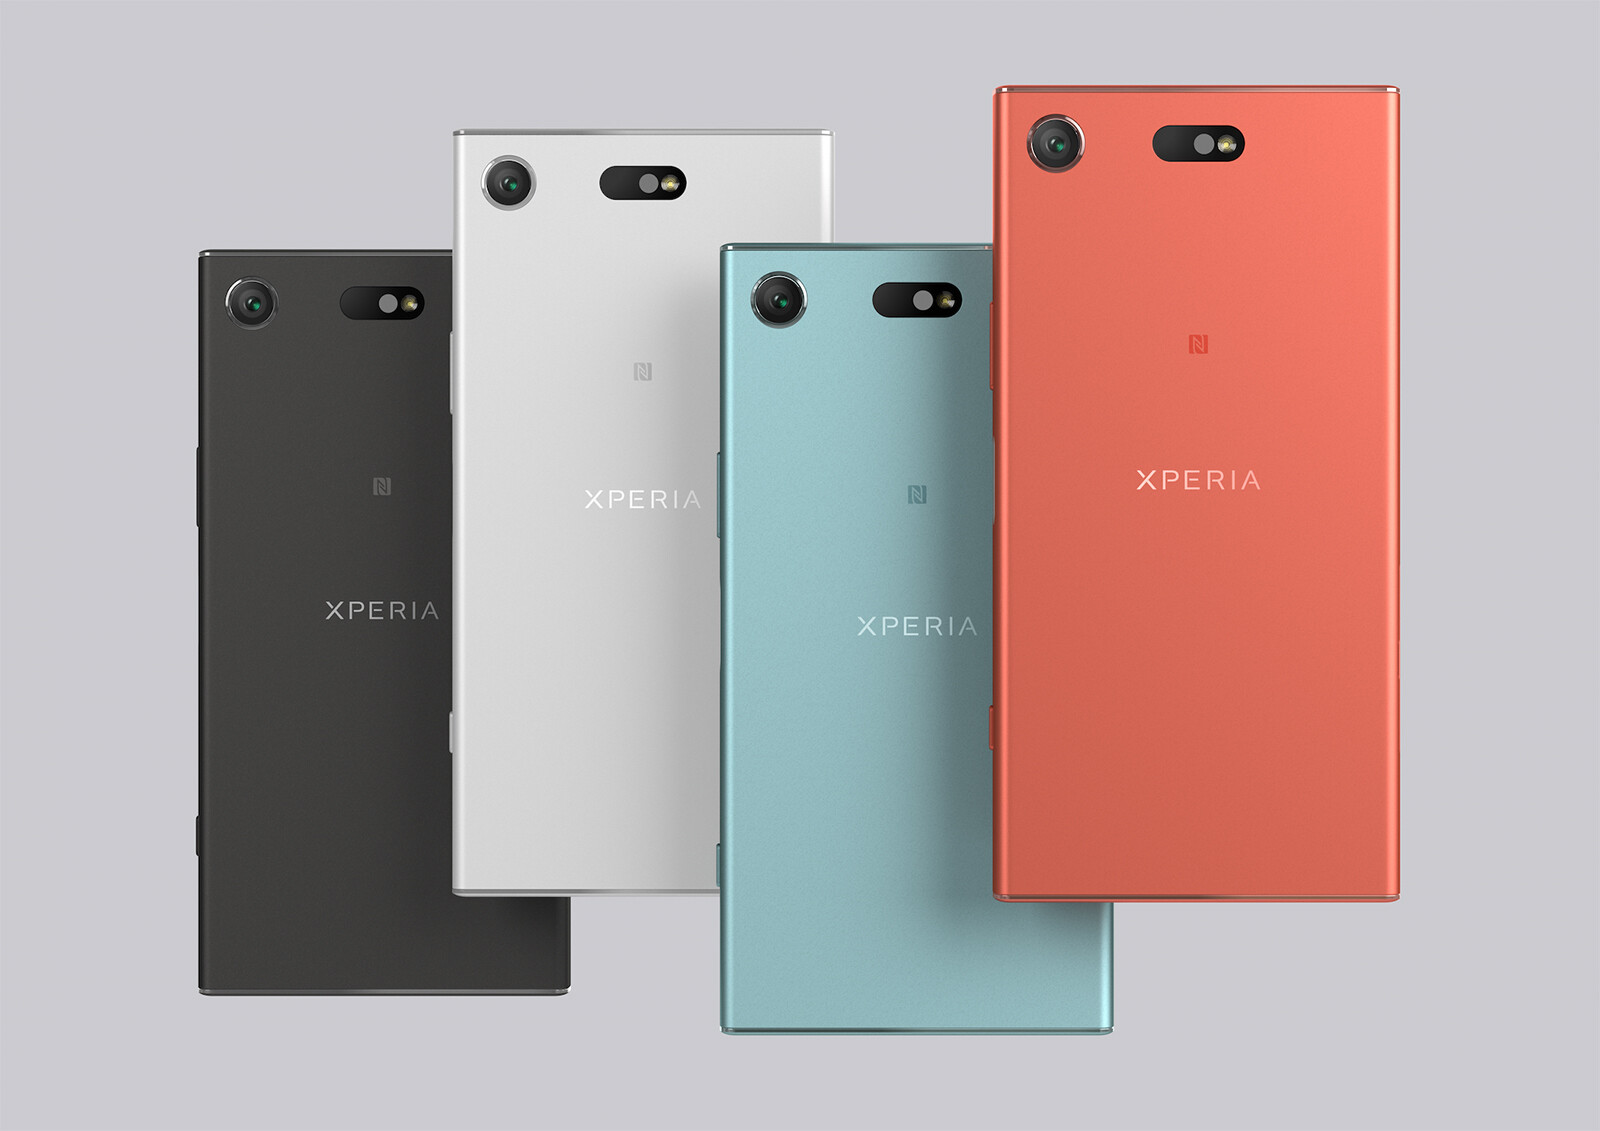 sony-xperia-xz1-xz1-compact-hands-on-review